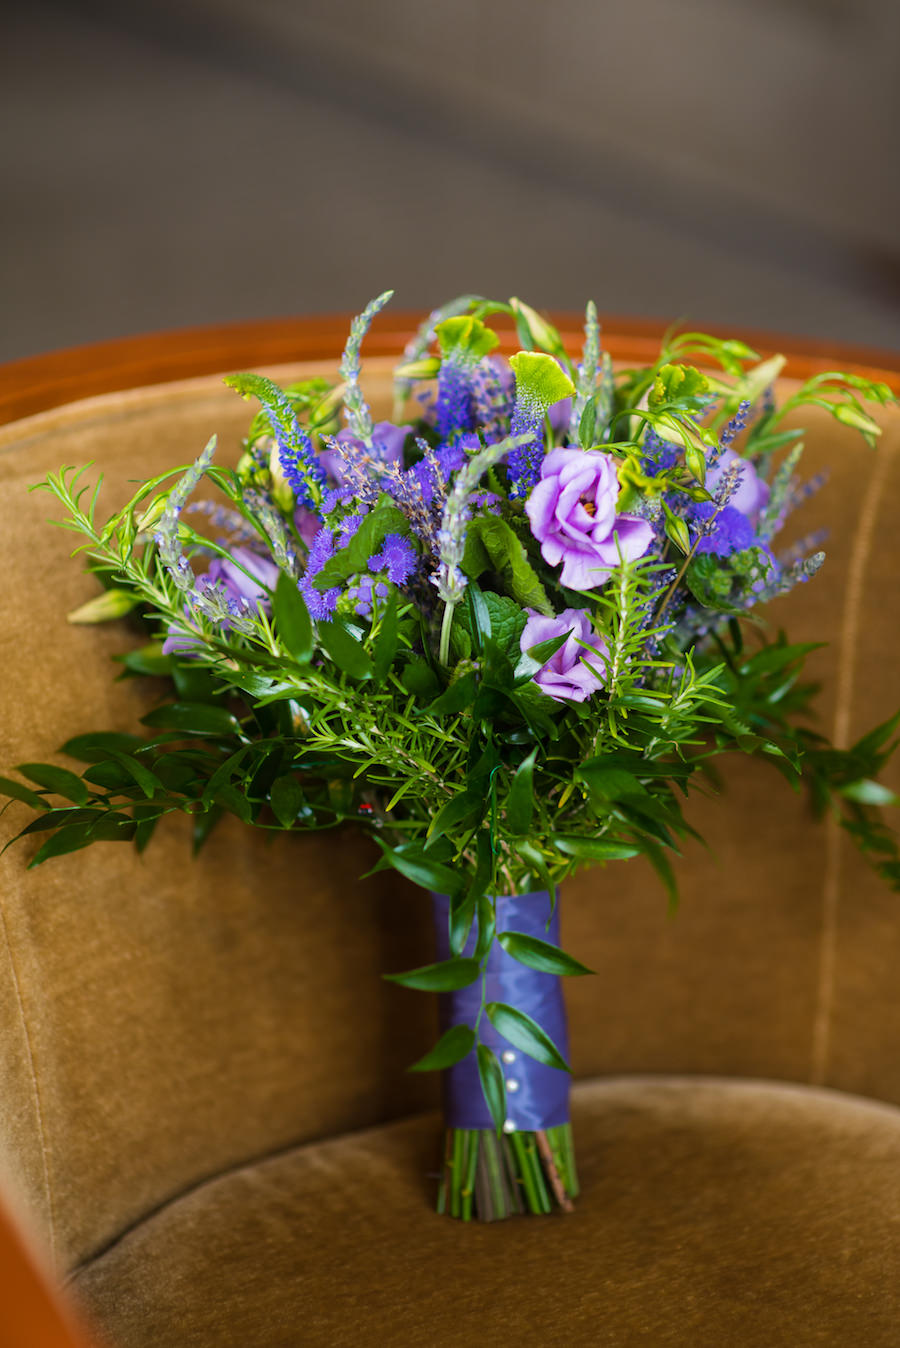 Garden Inspired Wedding Bouquet of Flowers with Purple Roses, Buddleia, Veronica, Larkspur and Greenery | South Tampa Wedding Florist Apple Blossoms Floral Design | Photo by Wedding Photographer Kera Photography